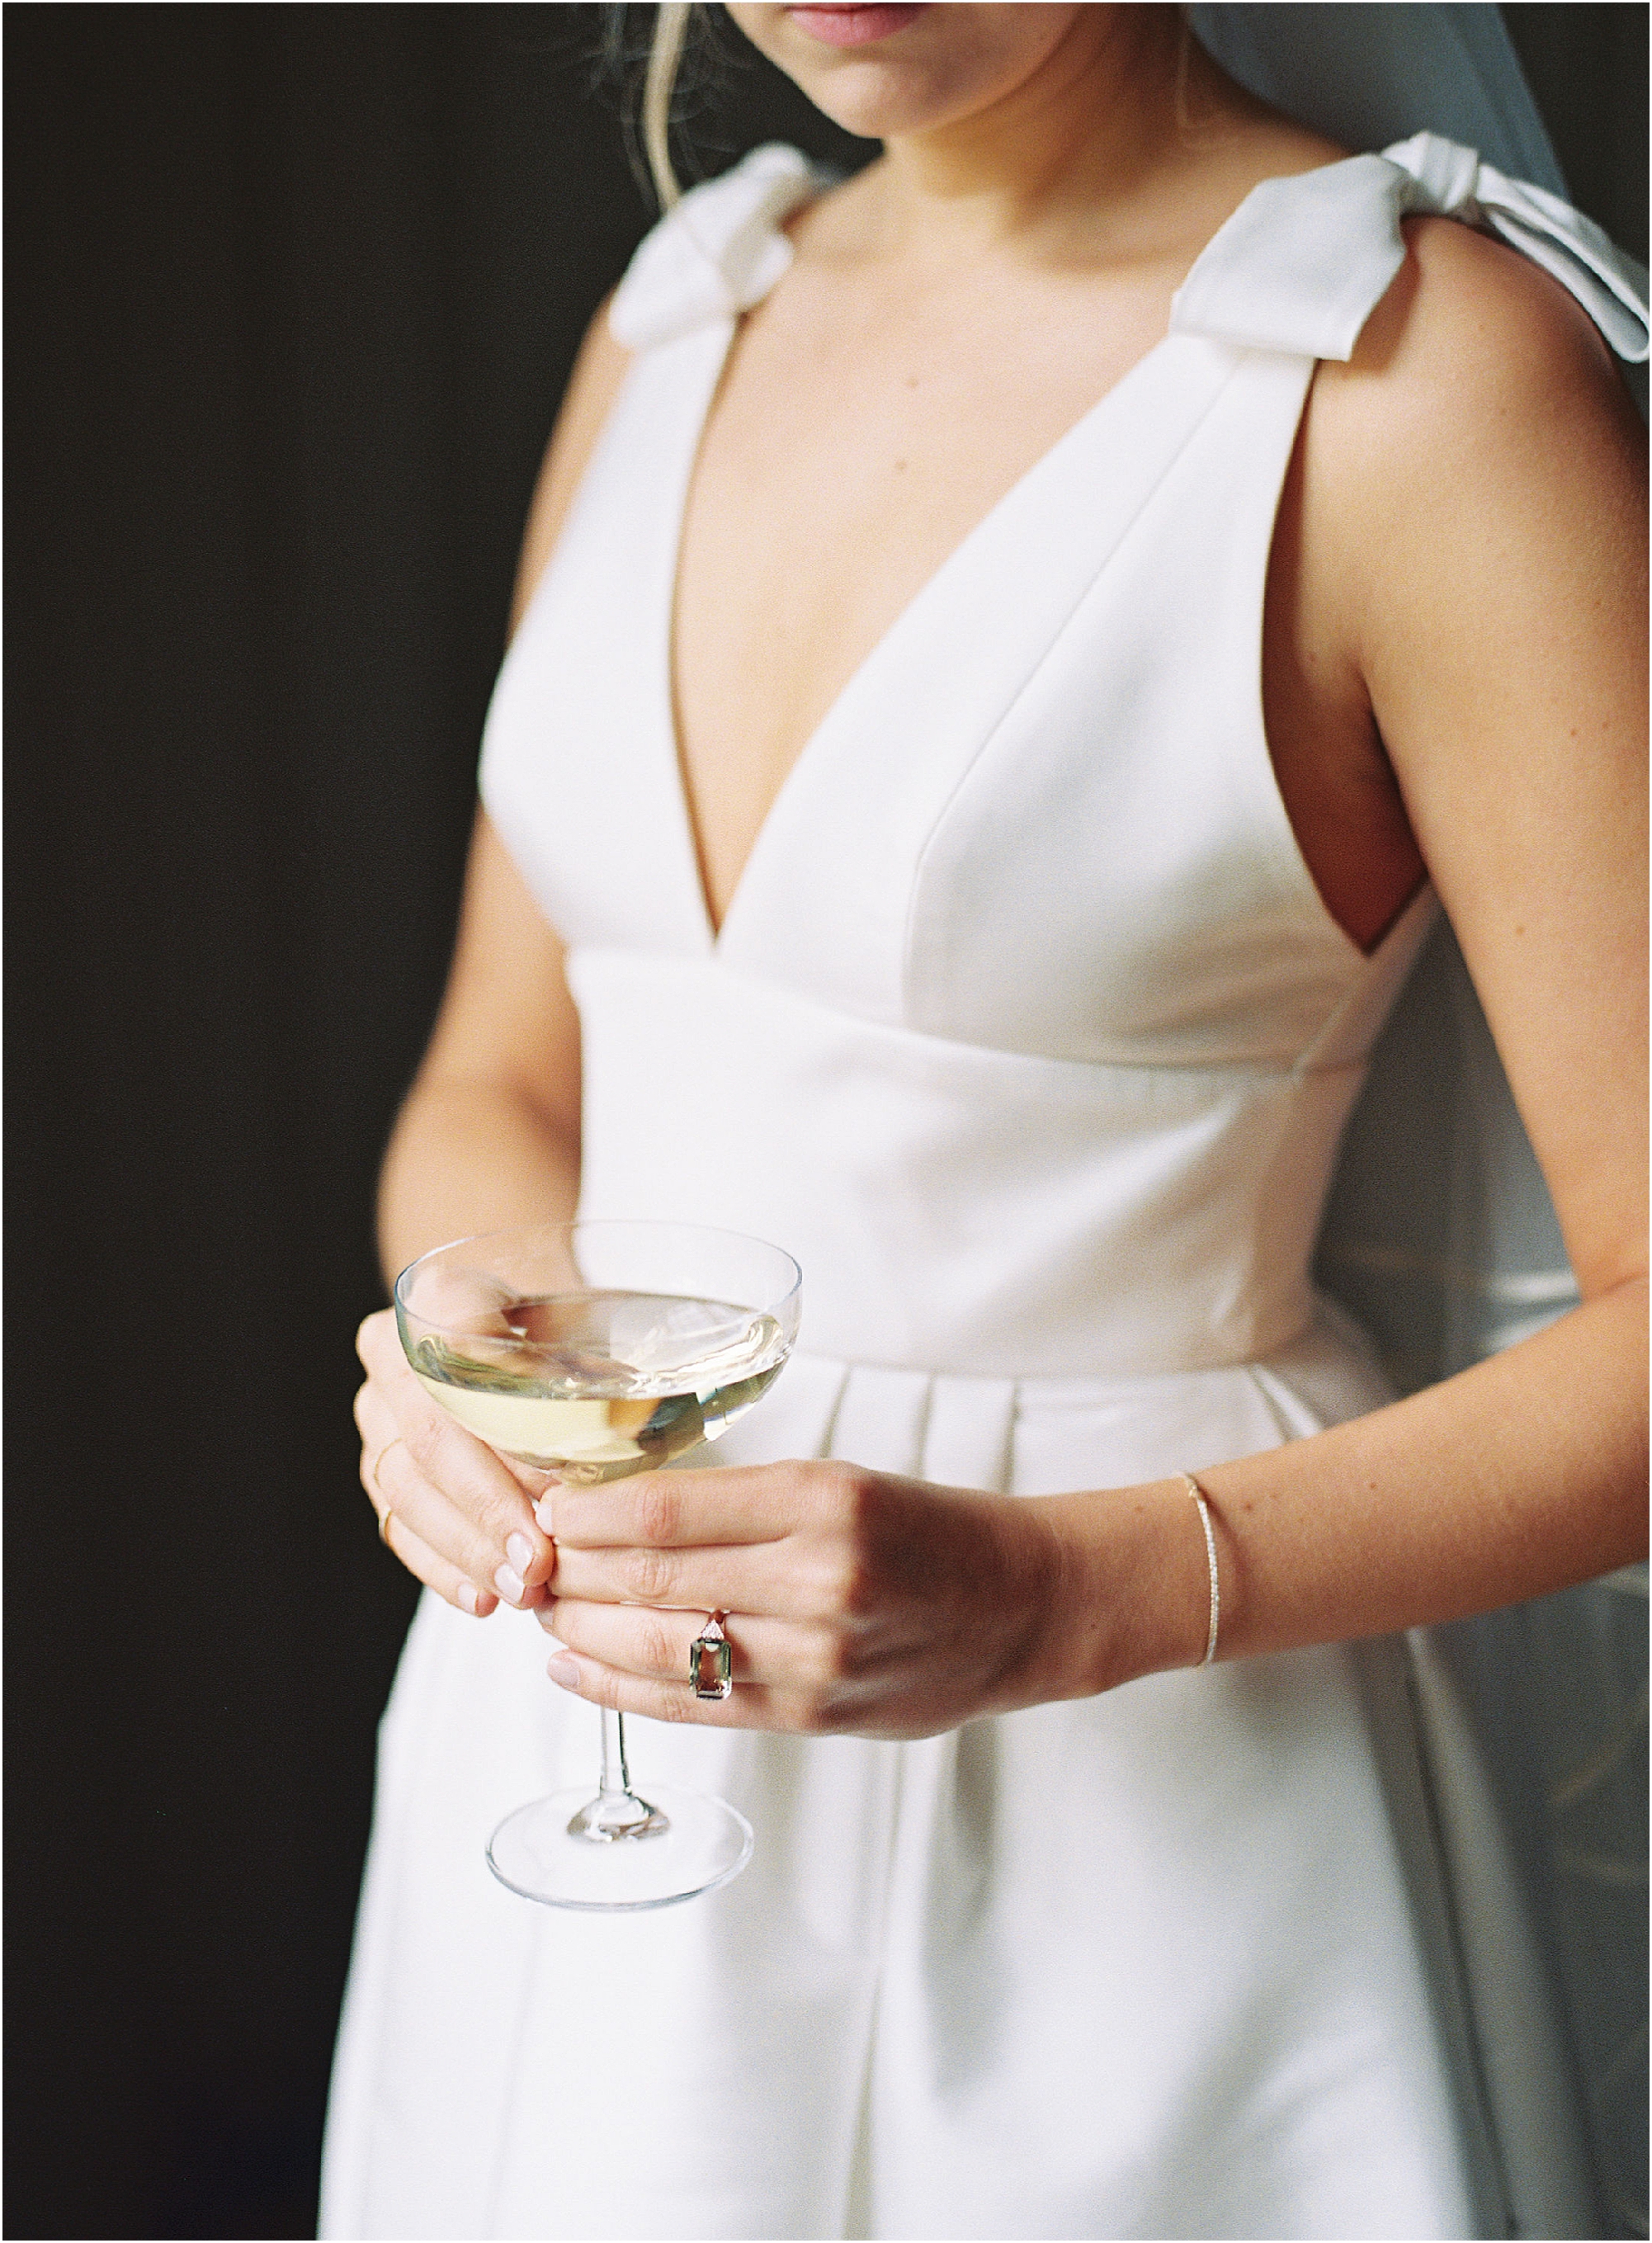 Elegant and sophisticated bride holding glass of champagne